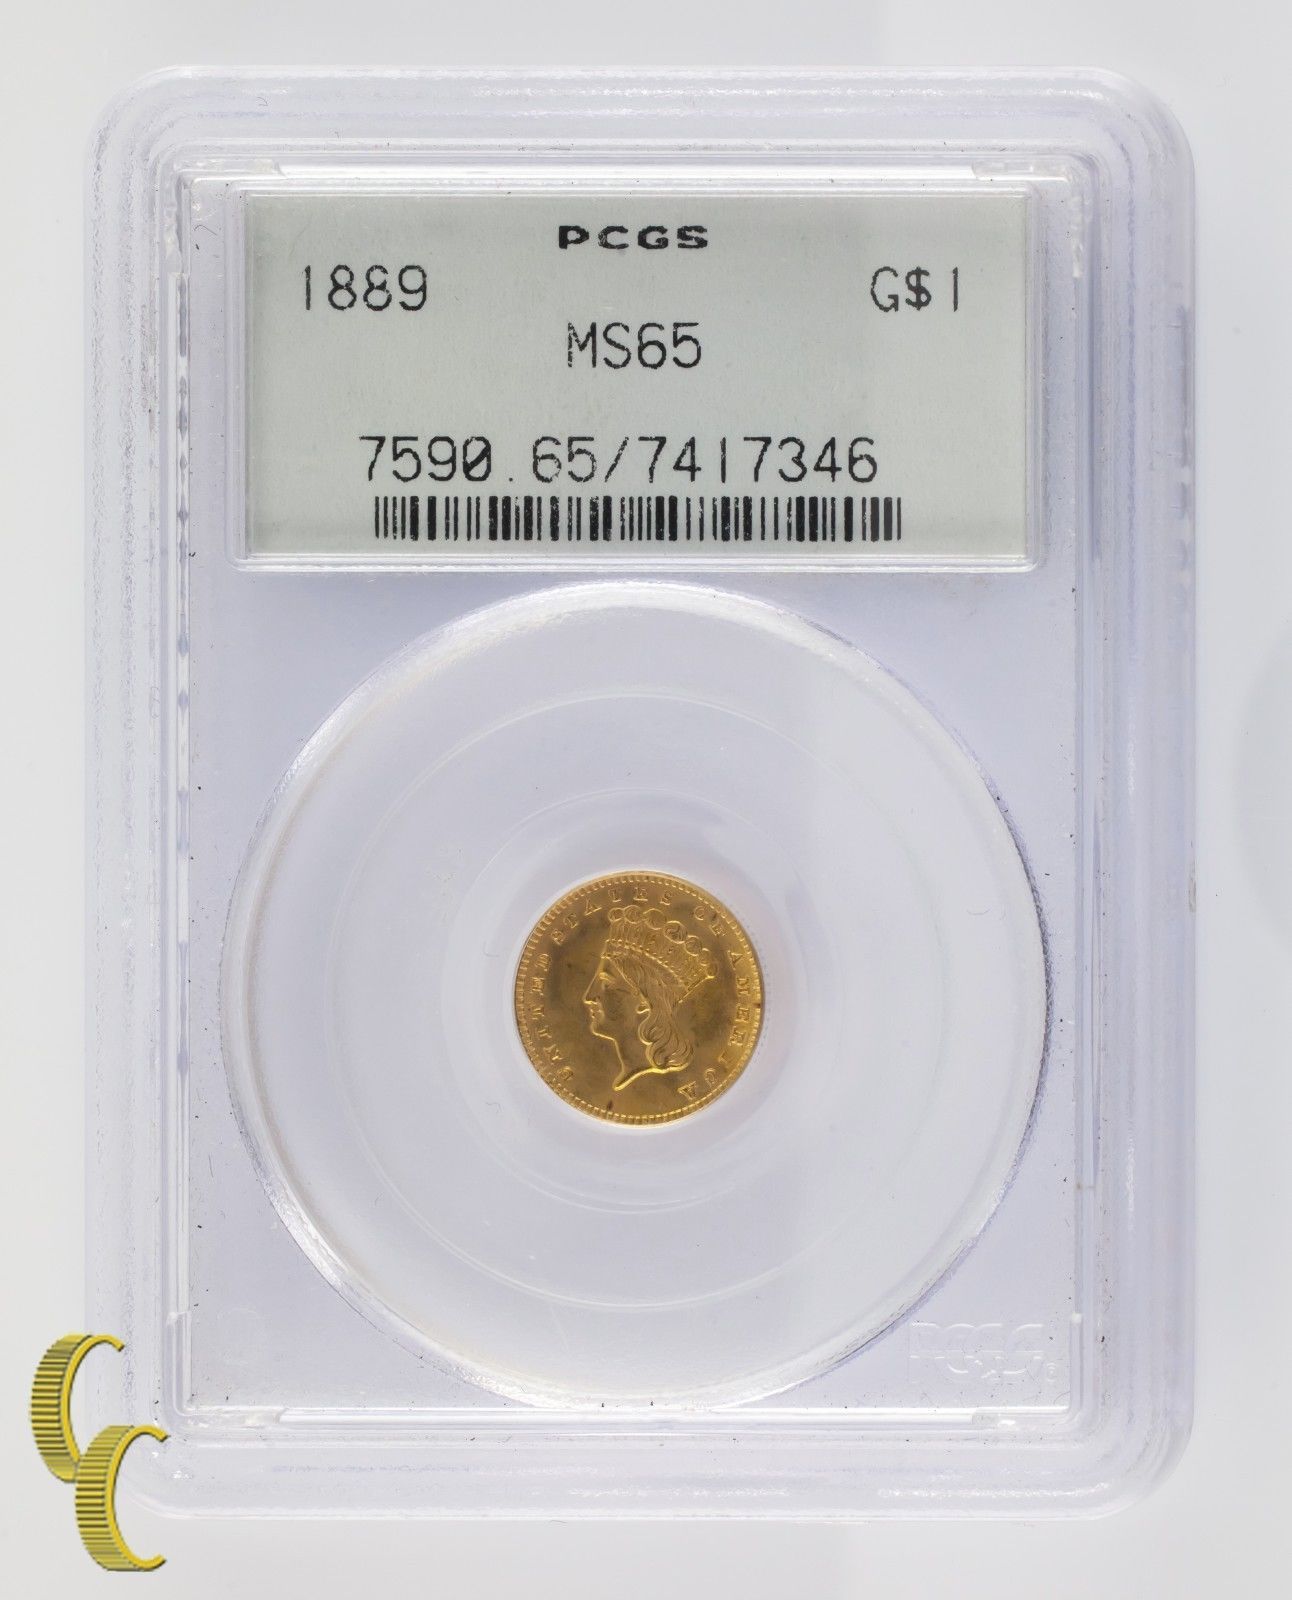 1889 Gold $1 Indian Princess Graded by PCGS as MS65 Gorgeous Coin #7590 - $3,492.72